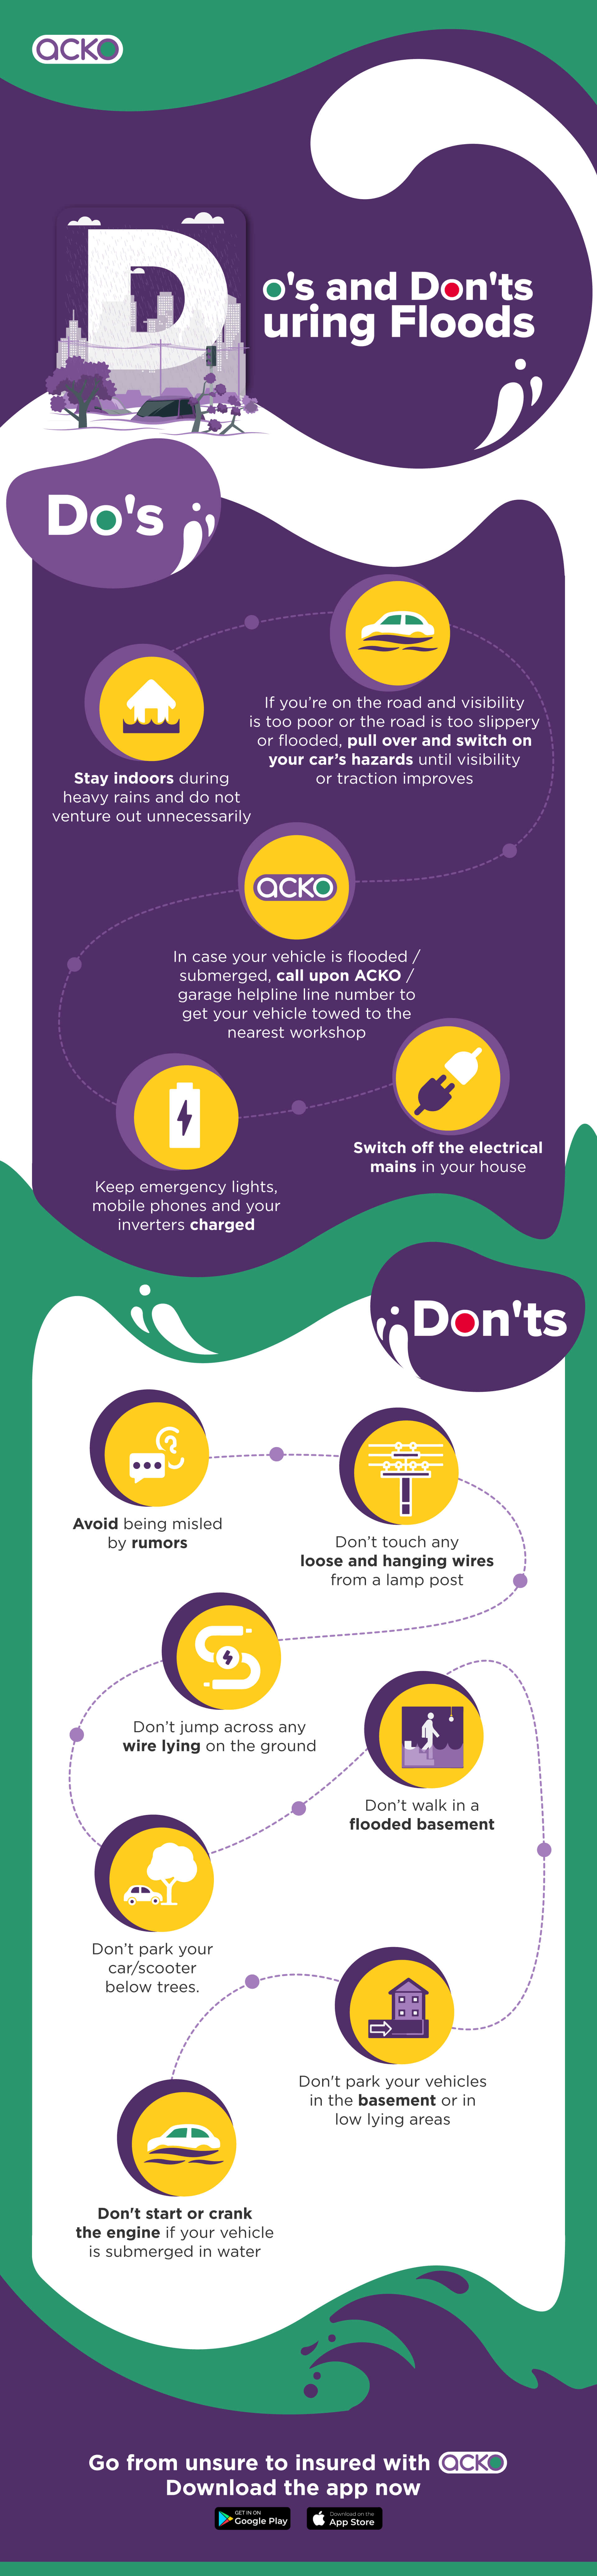 Infographic on "Do's and Don'ts During Floods"